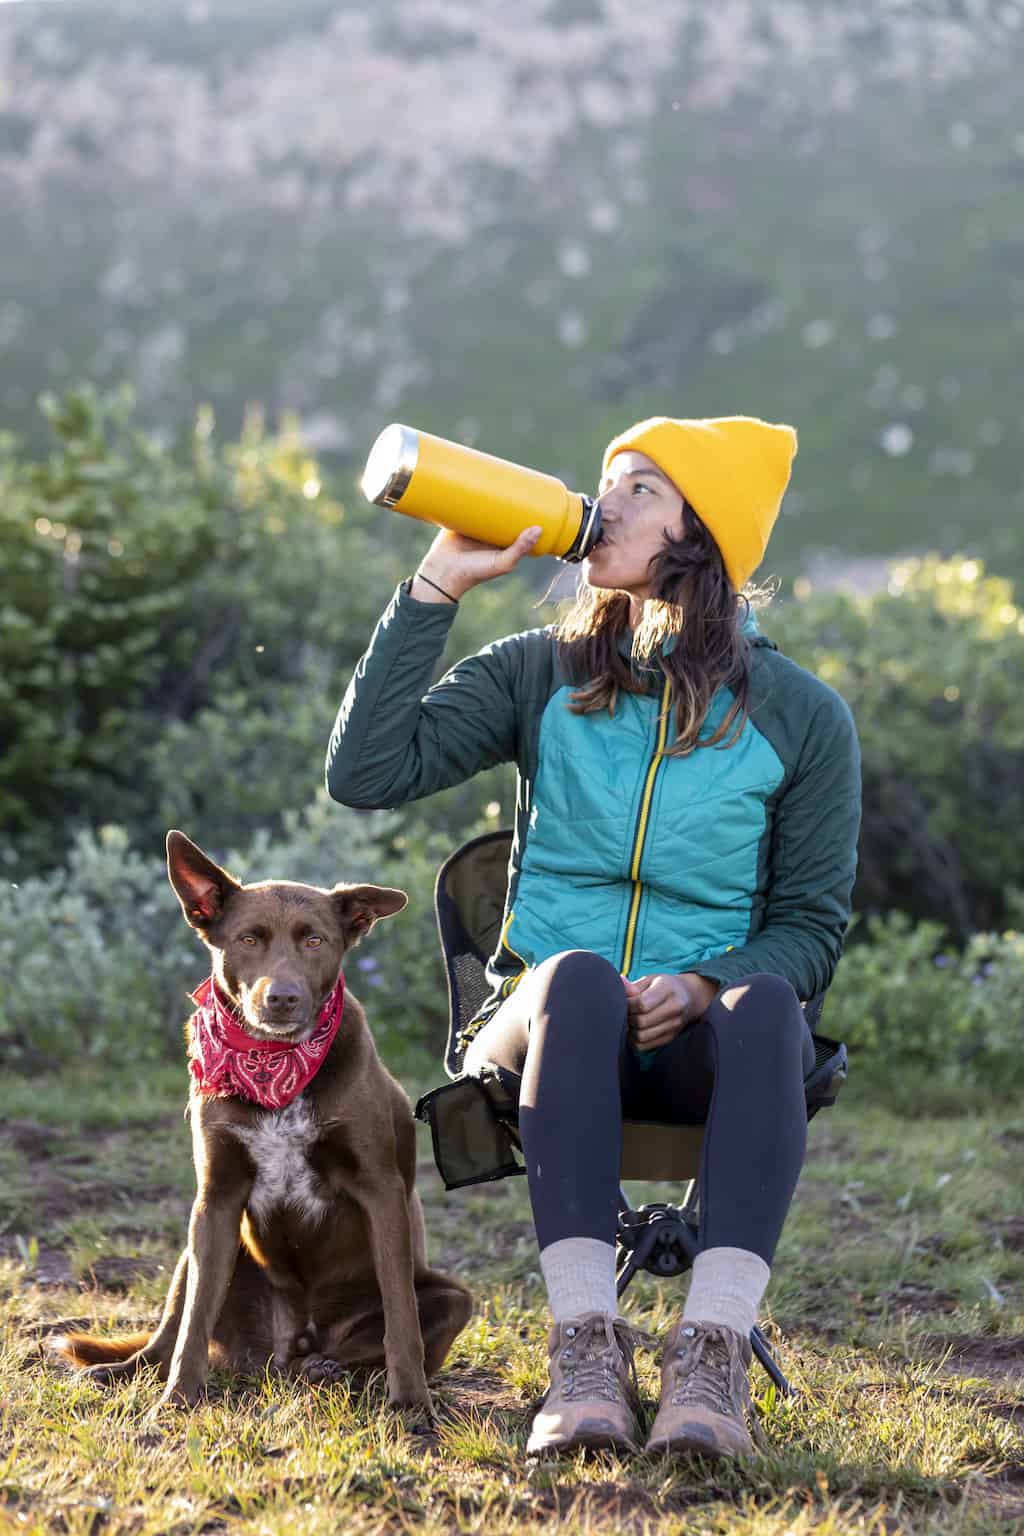 A woman sitting in a camp chair next to a dog and drinking out of a yellow water bottle.